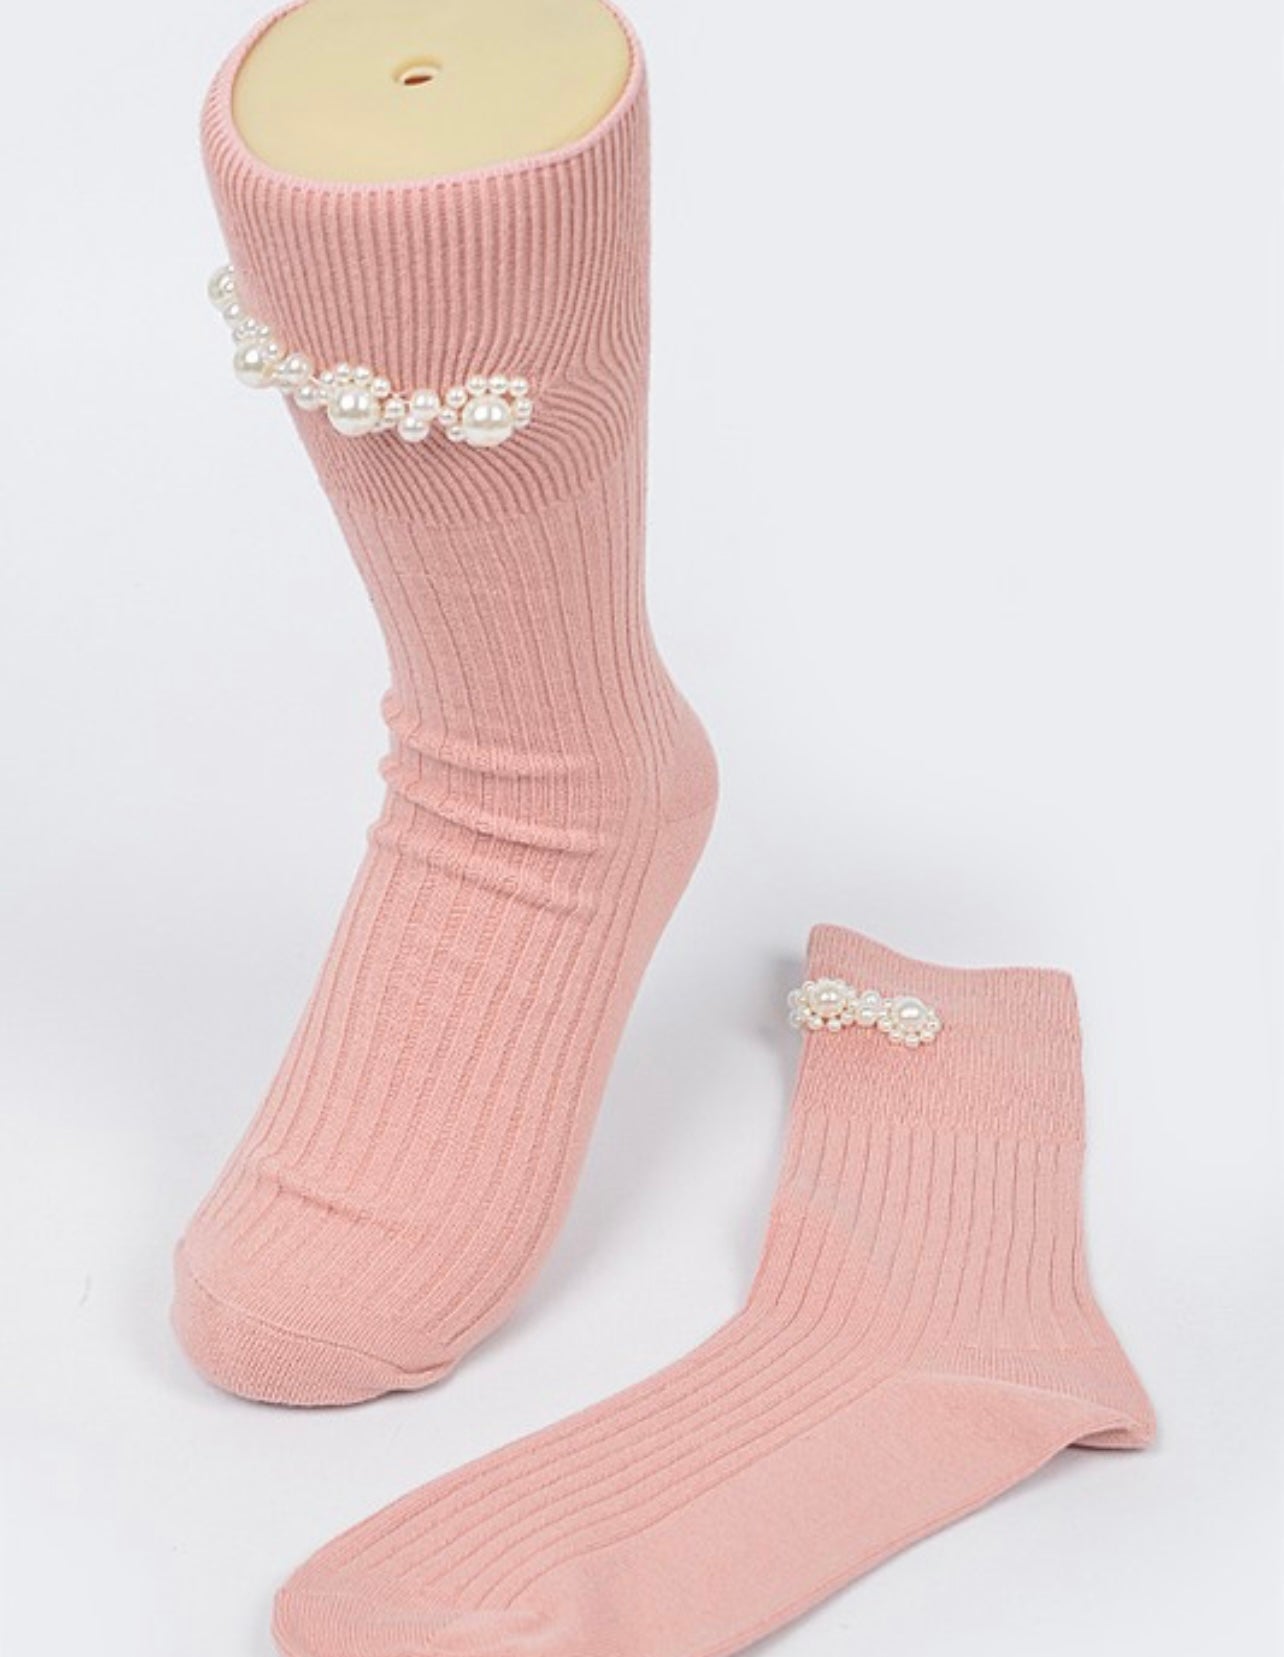 Socks with pearl